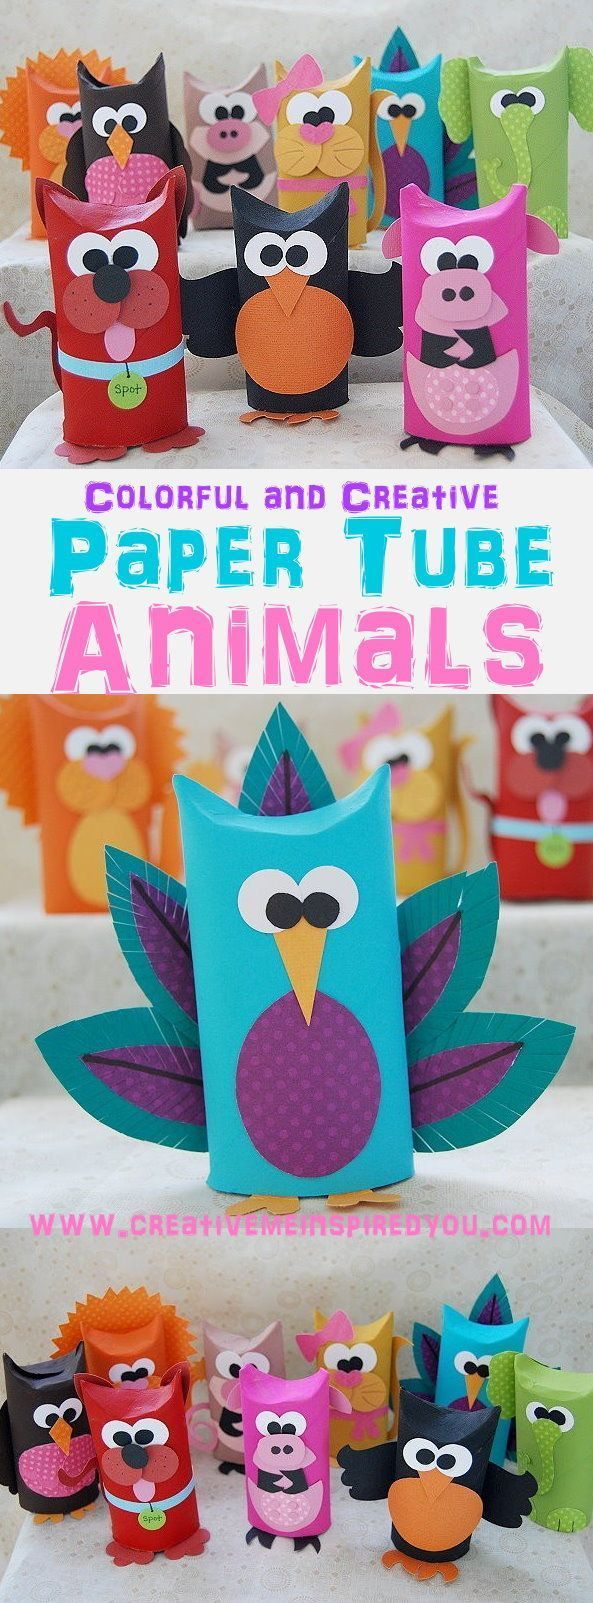 Toilet Tube Animals -   24 recycled crafts toilet
 ideas